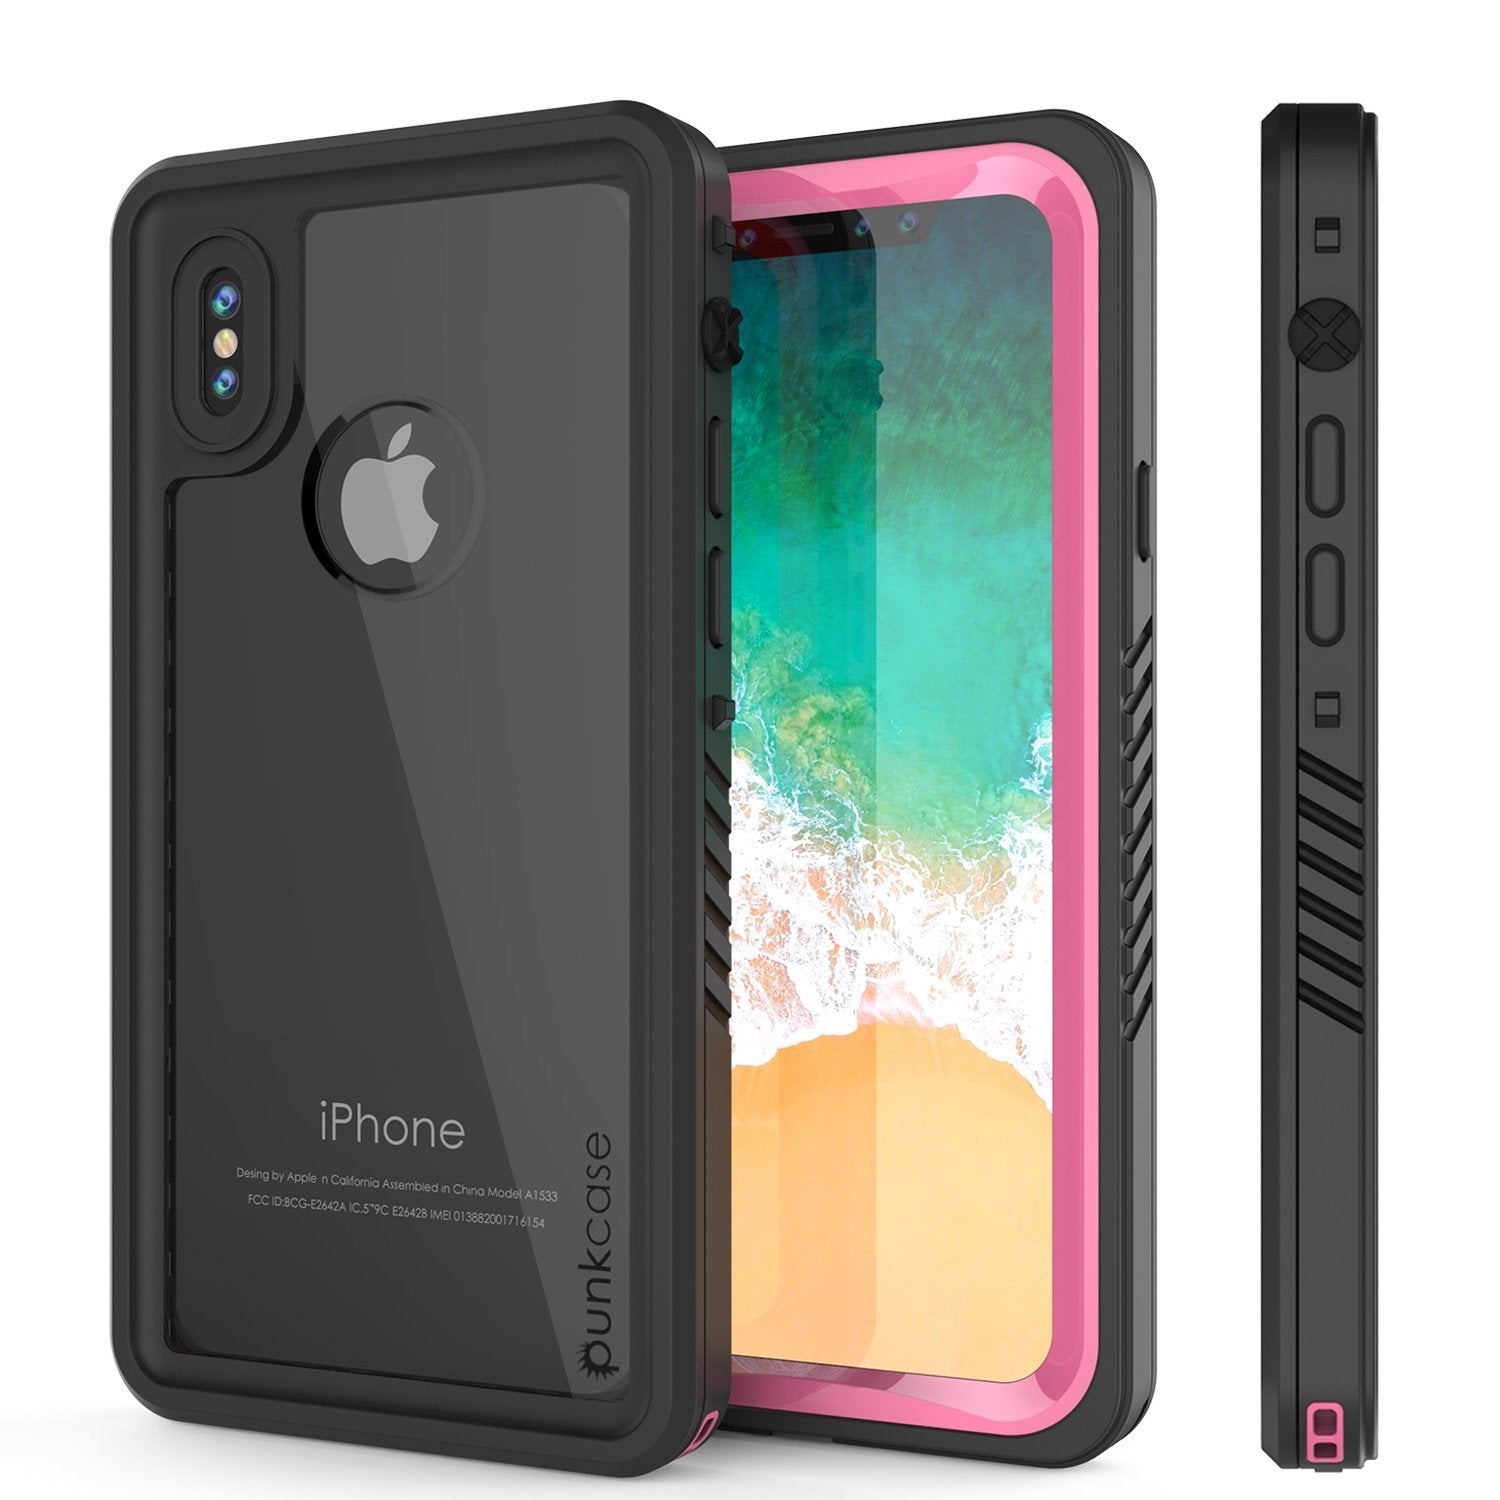 iPhone XS Max Waterproof Case, Punkcase [Extreme Series] Armor Cover W/ Built In Screen Protector [Pink] - PunkCase NZ